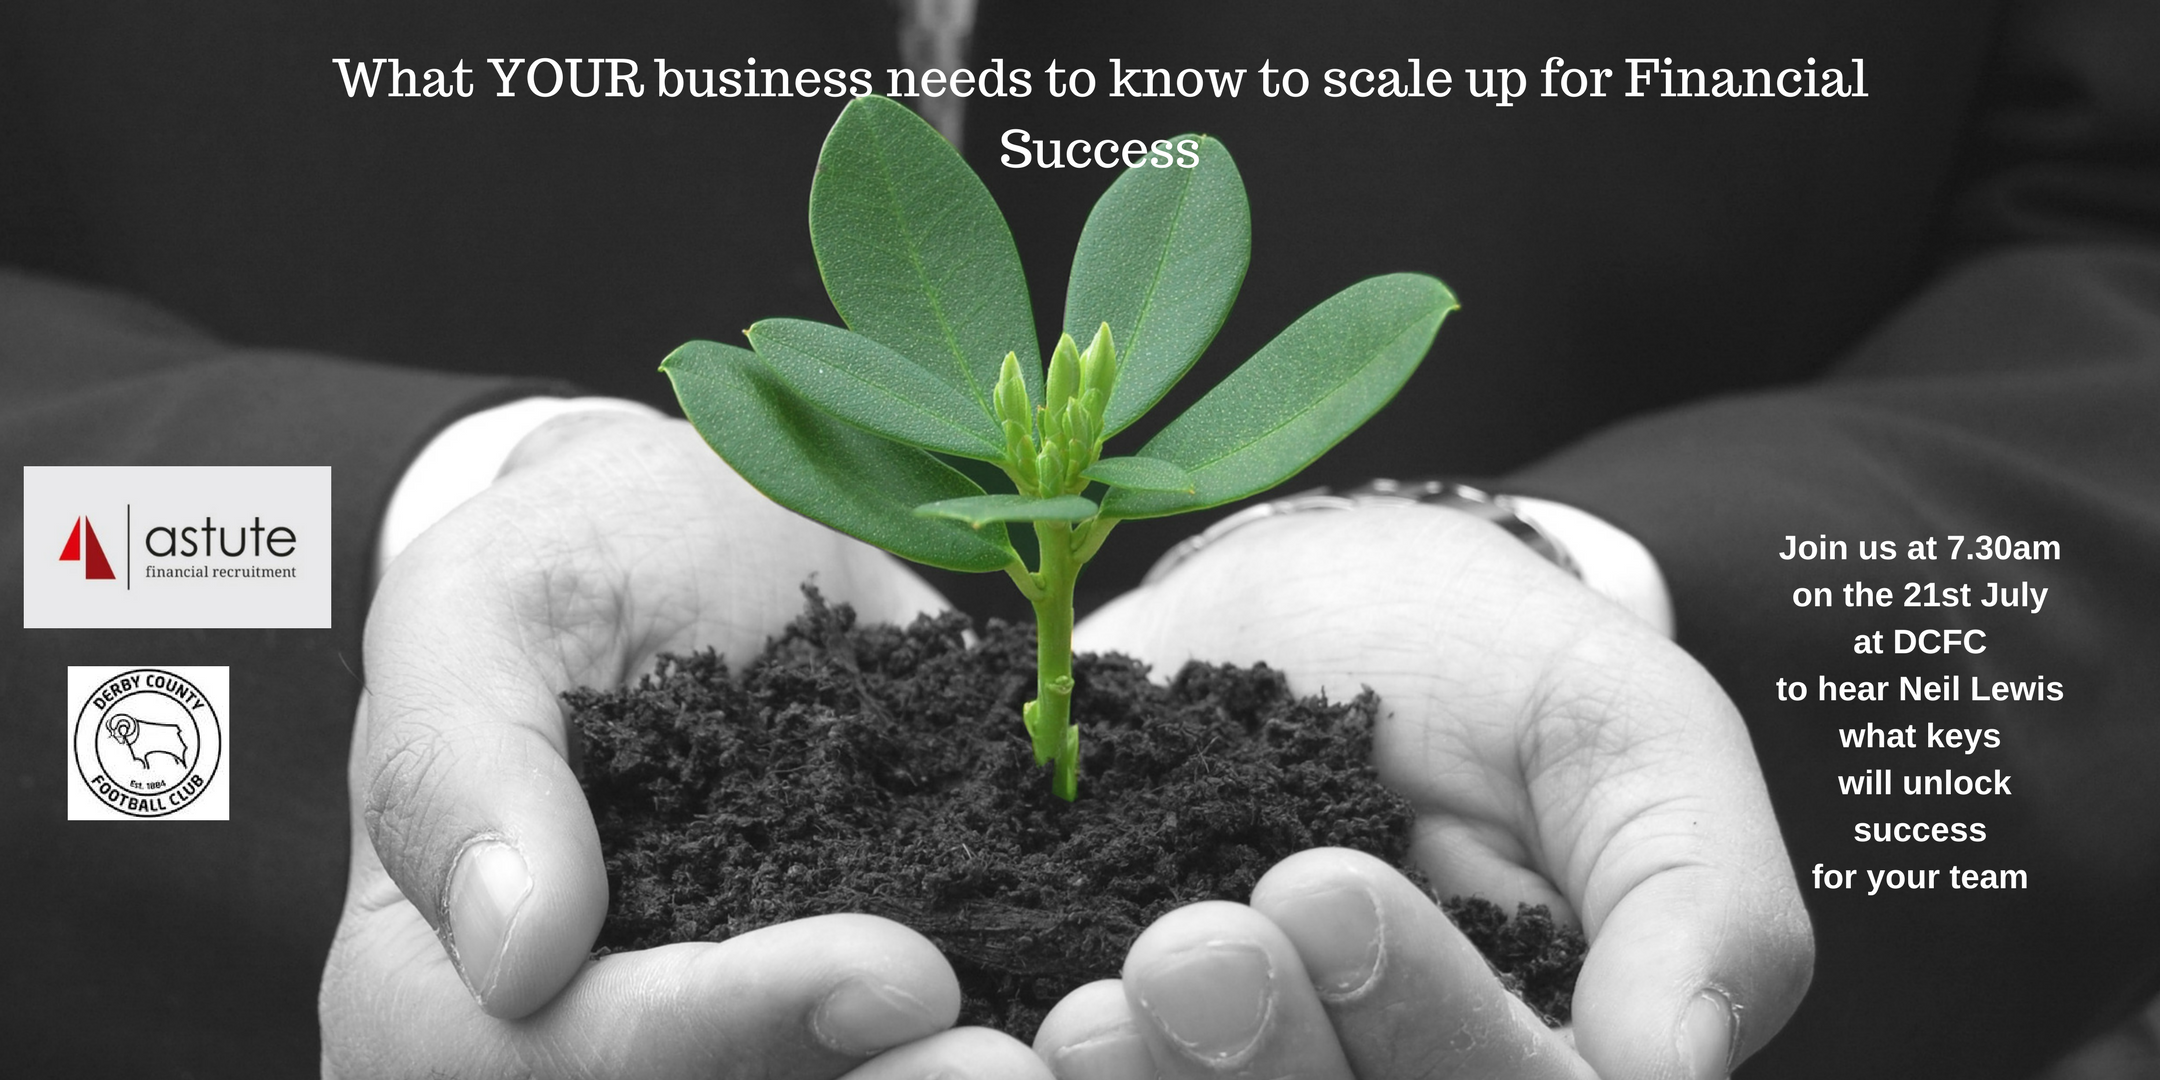 How to scale up your business for financial success.